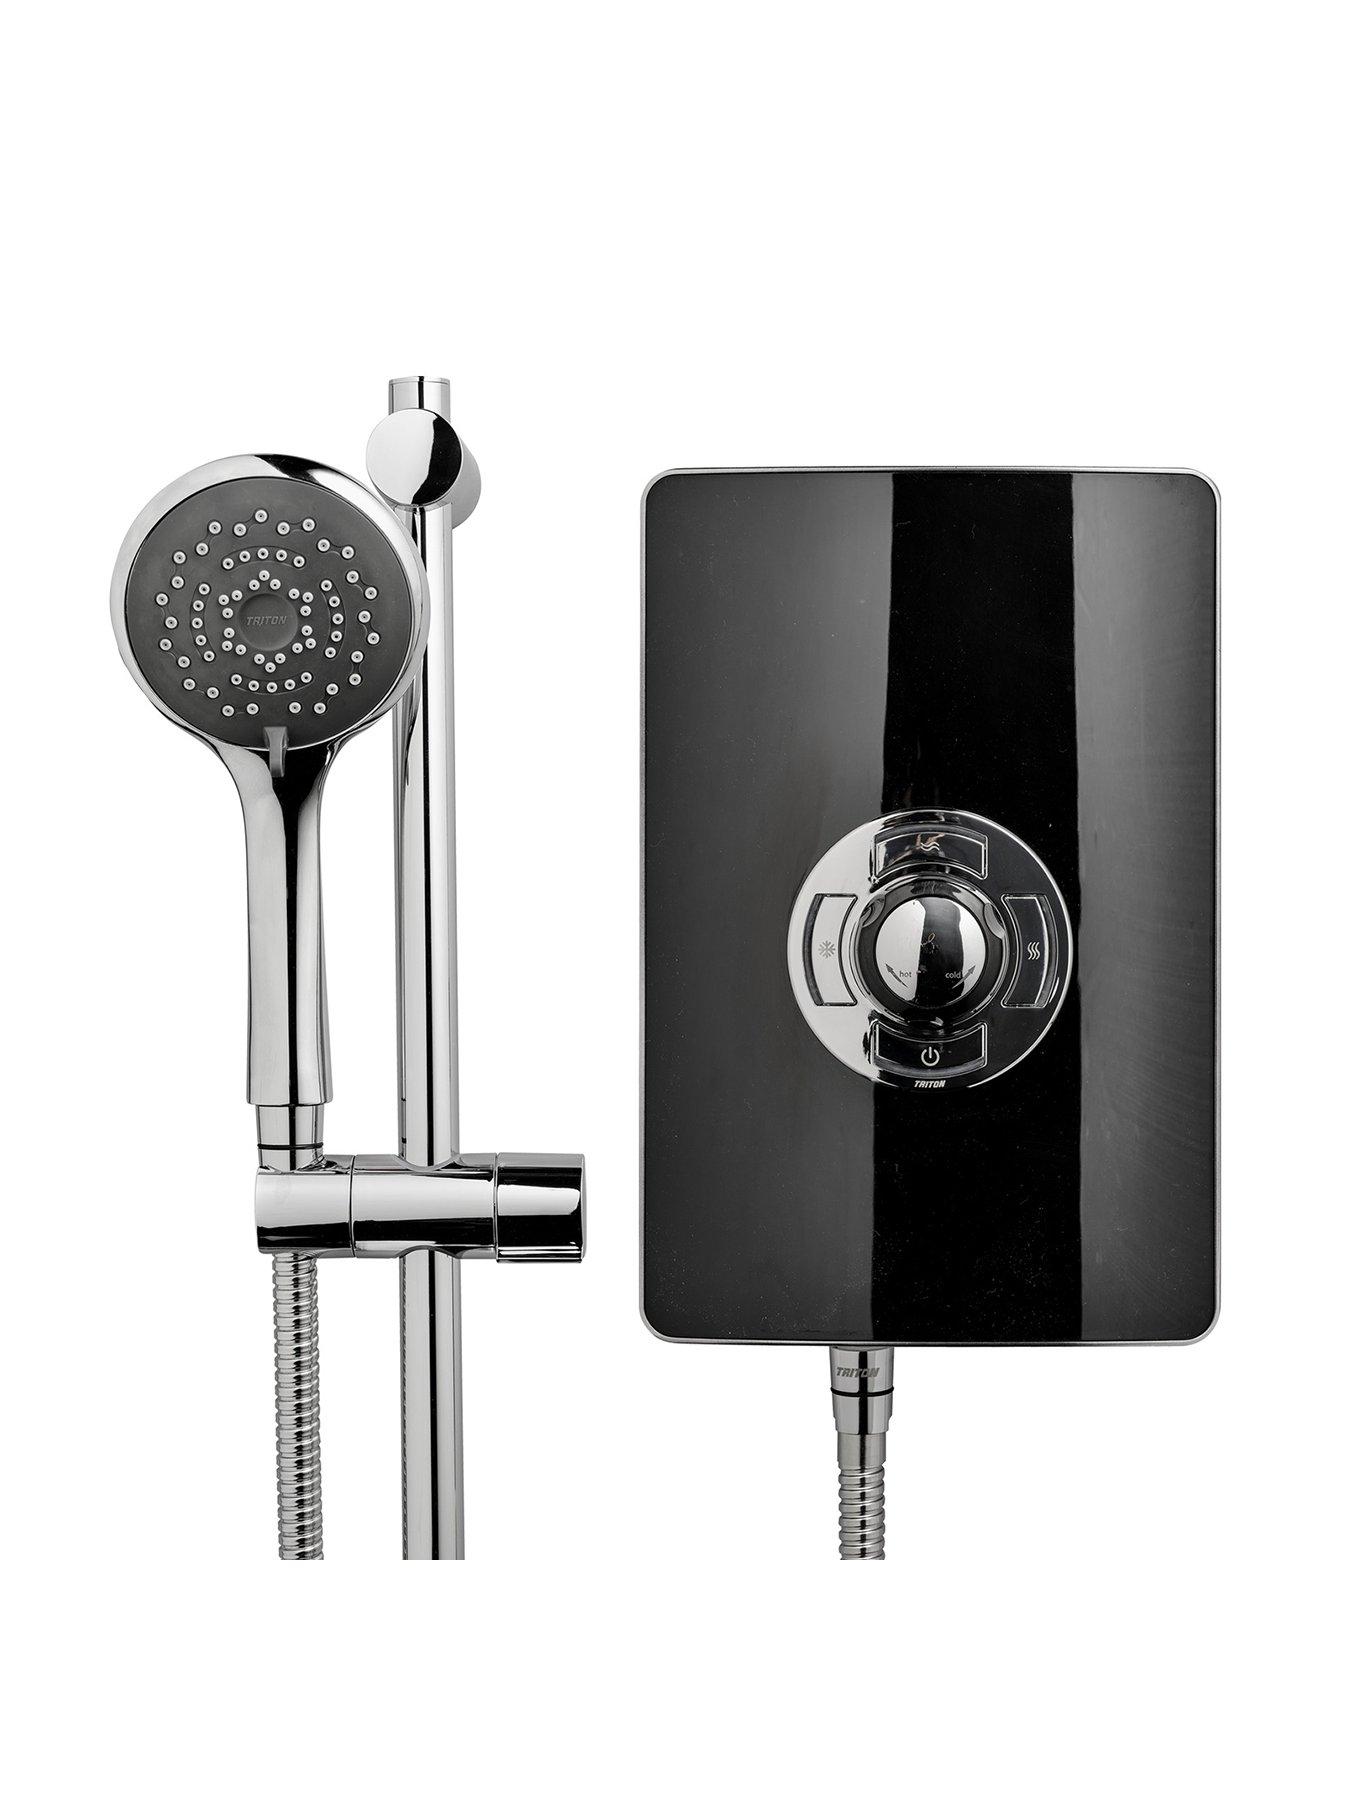 Triton Collection Ii 8.5Kw Electric Shower - Black Gloss